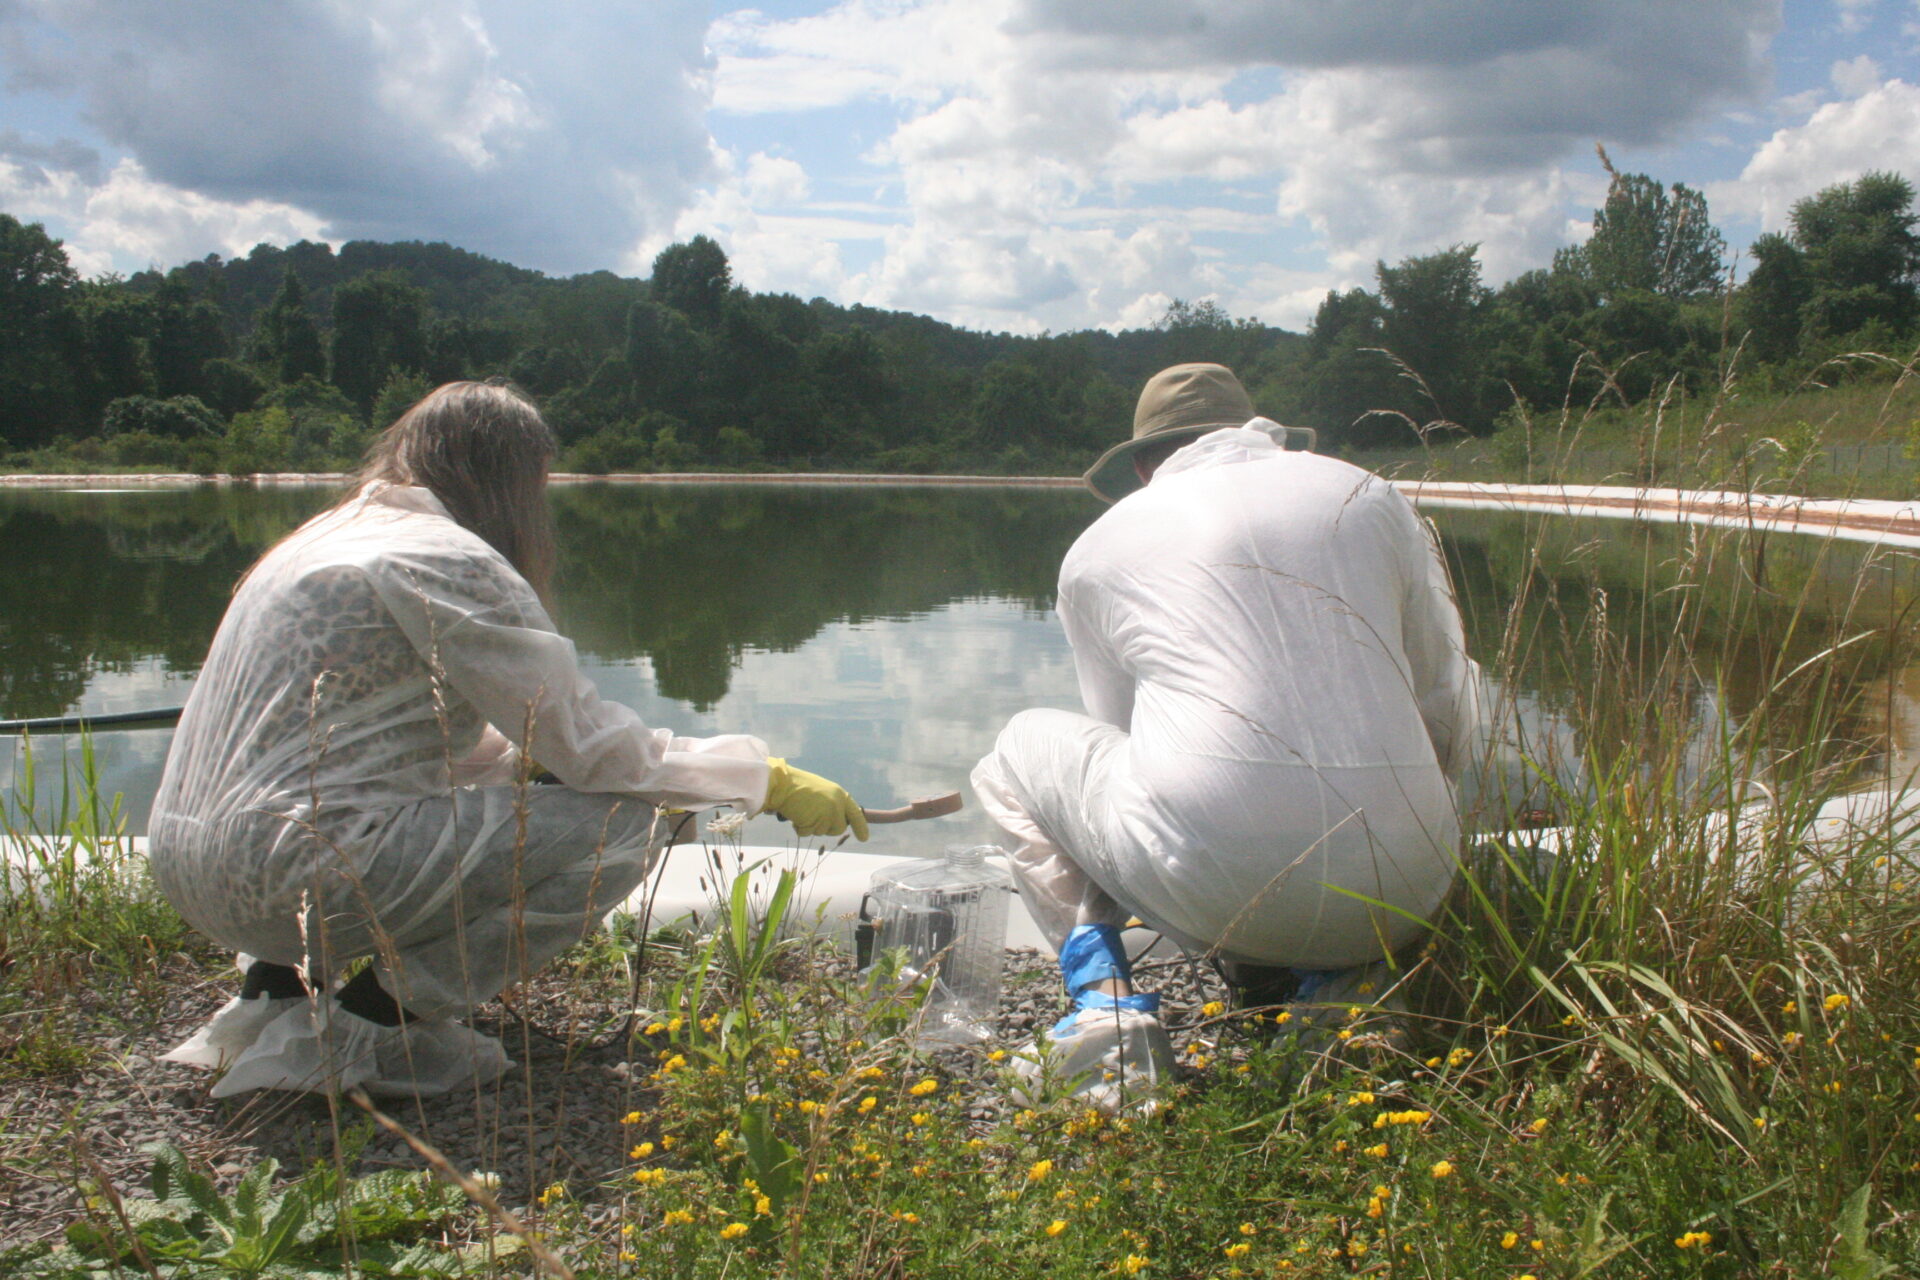 Two adults, with their backs to the camera, wear protective suits and coverings while leaning in to collect samples in water.